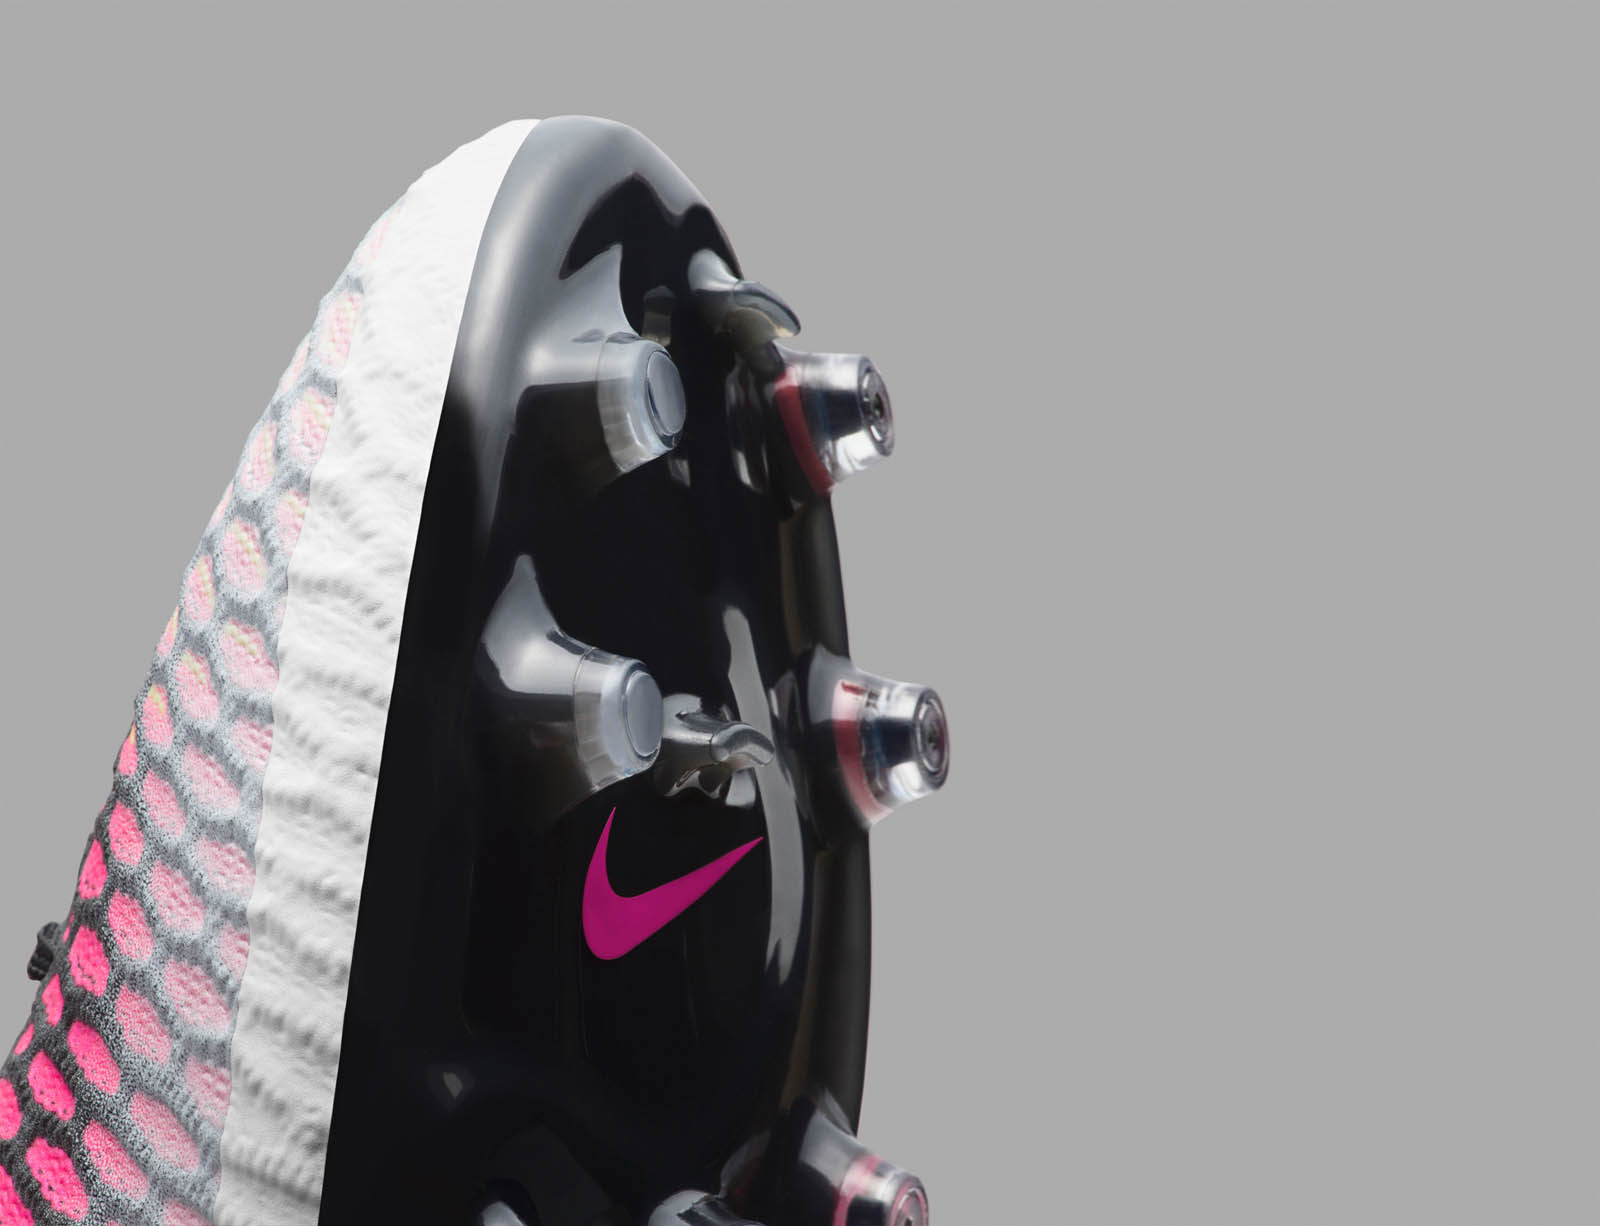 Outstanding Nike Magista Obra Radiant Reveal 2016 Boots Released ...